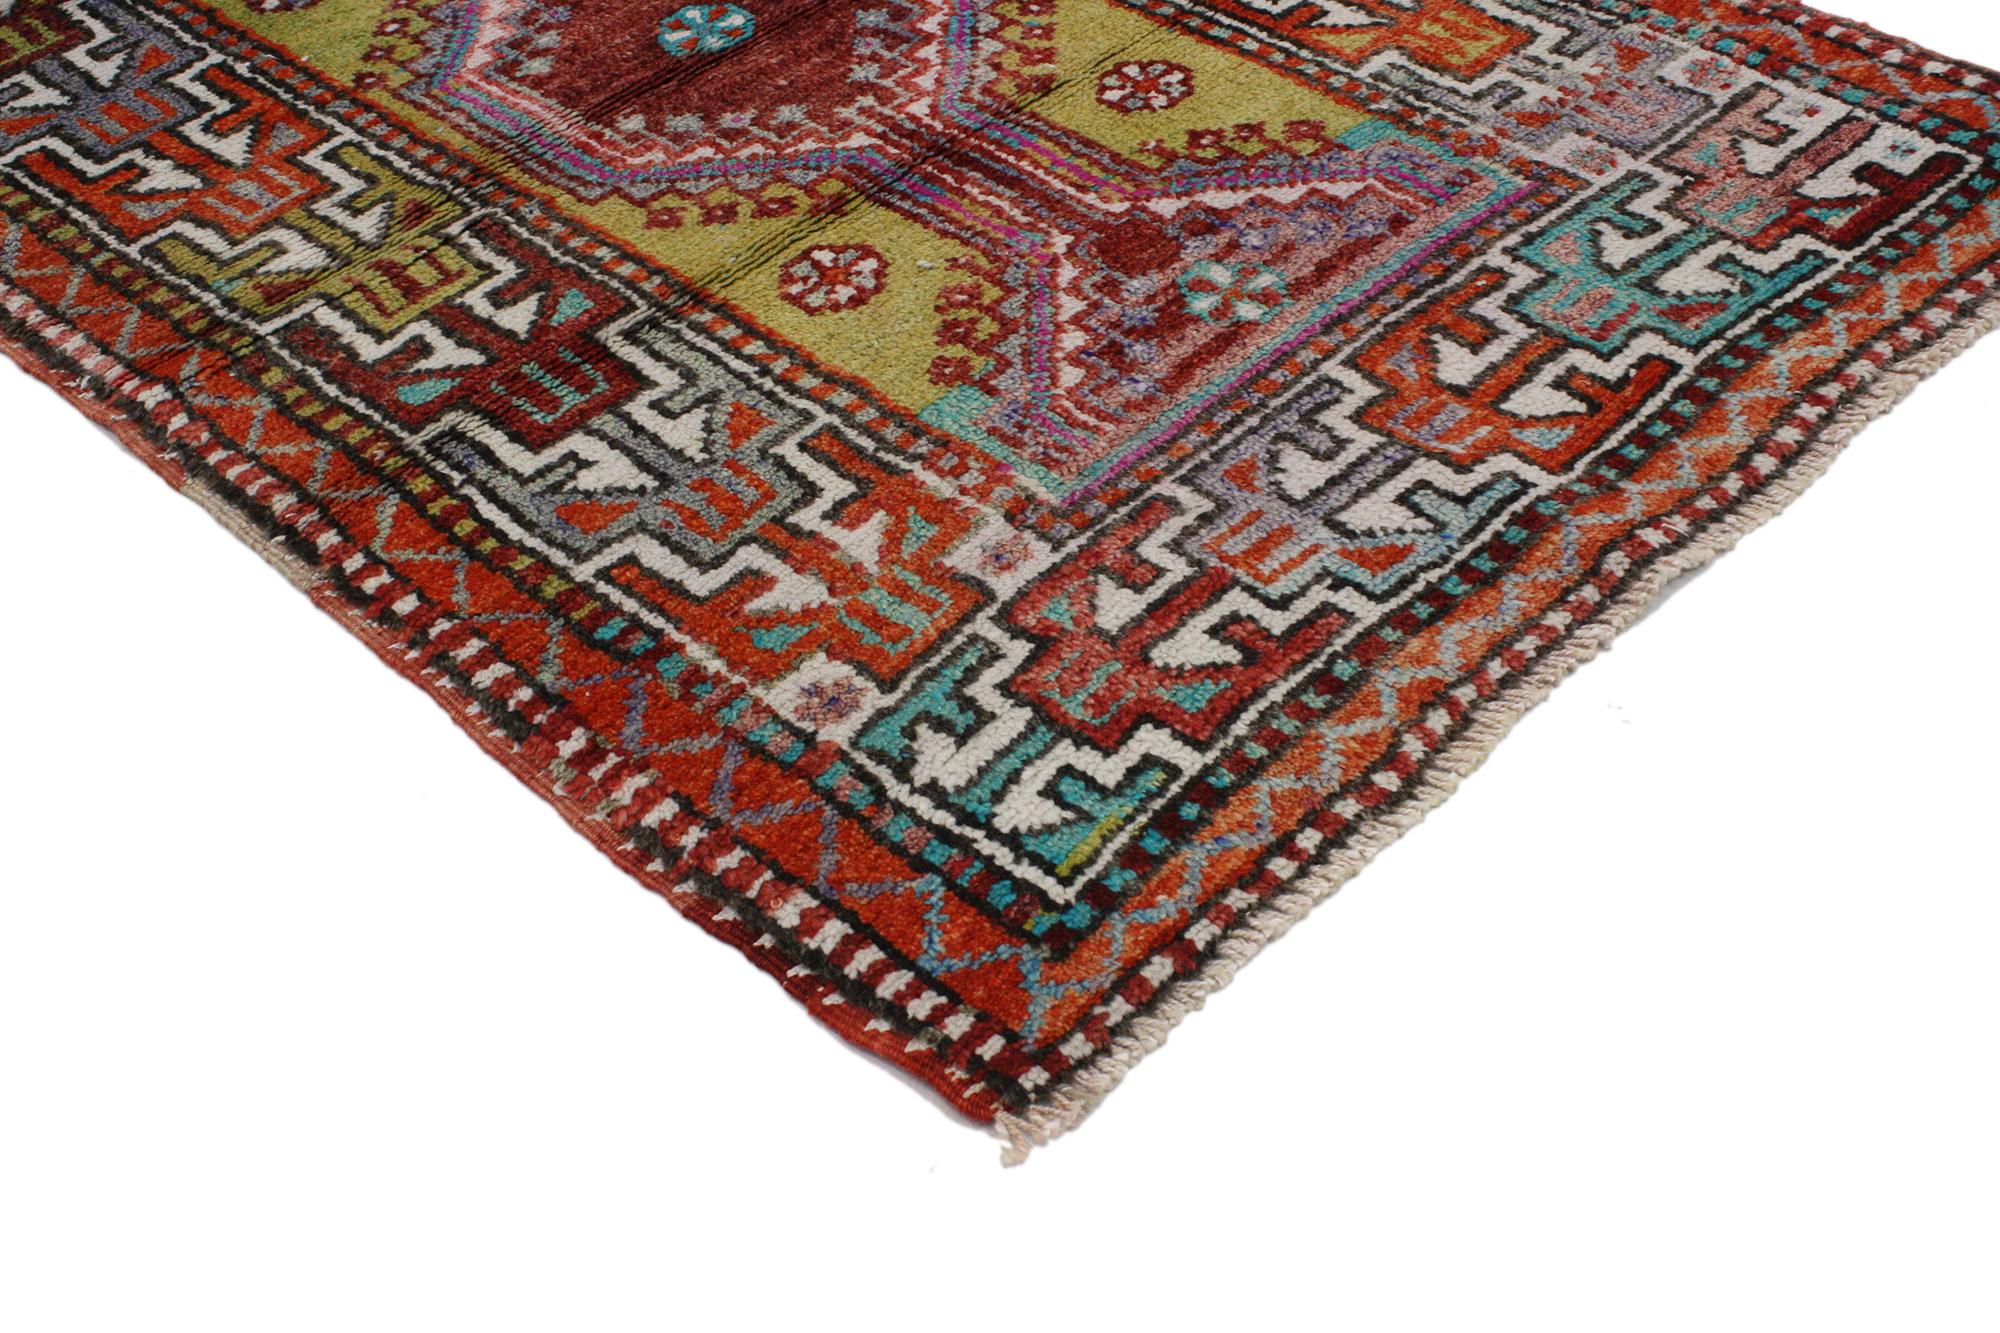 51740 Vintage Turkish Oushak Rug, Anatolian Yuntdag Rug, Foyer or Entry Rug. This hand-knotted wool vintage Turkish Oushak Yuntdag rug features a modern traditional style. Immersed in Anatolian history and vibrant colors, this vintage Oushak Yuntdag